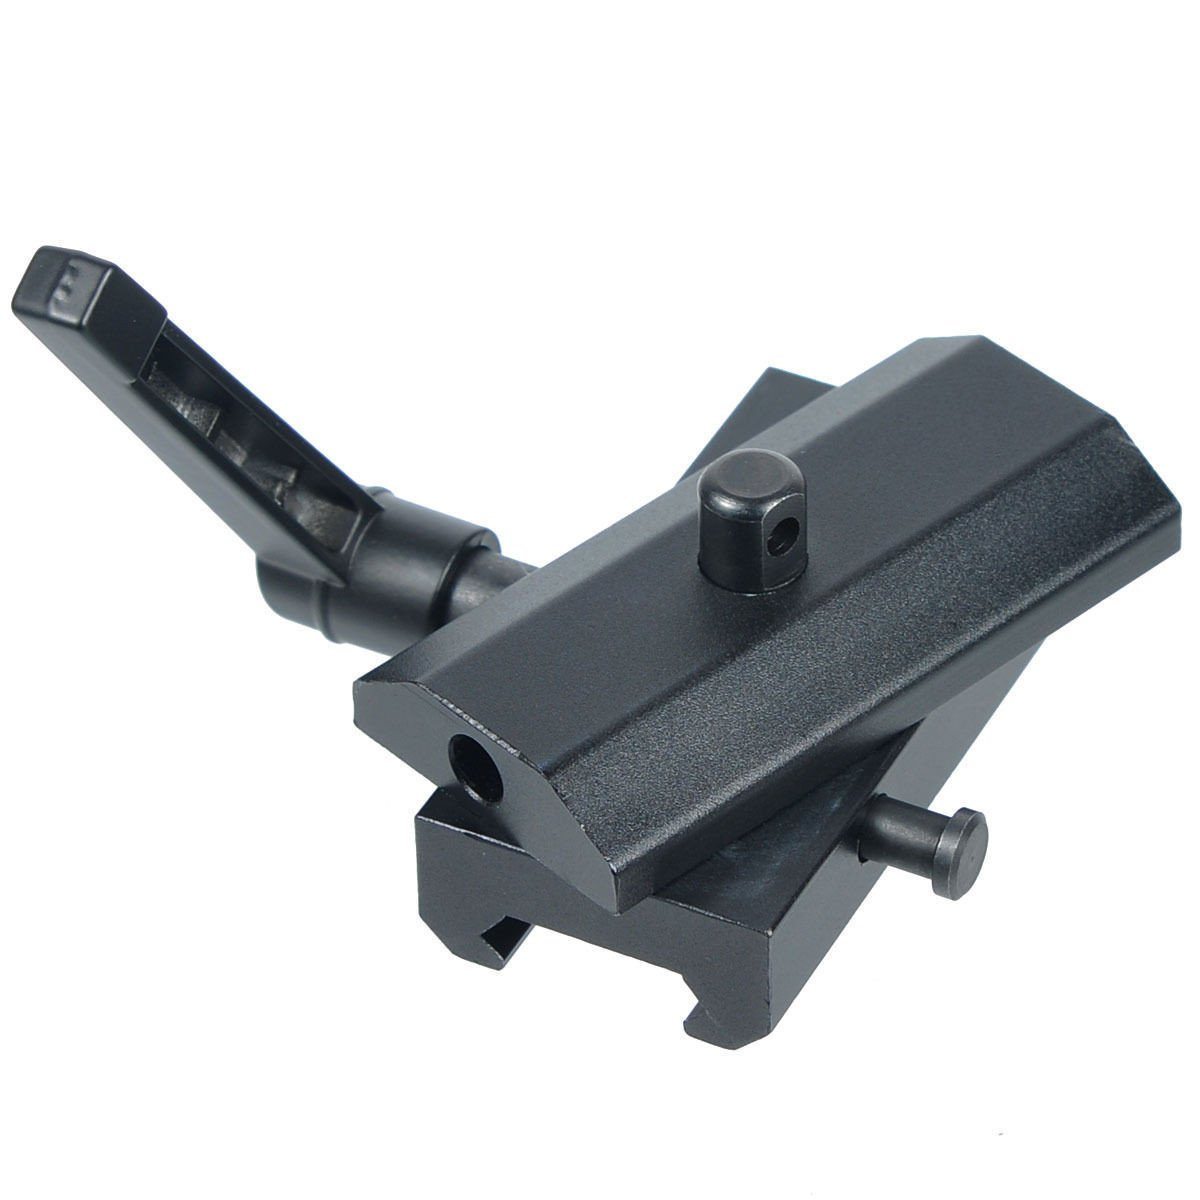 Rotating Quick Detachable Bipod Adapter for Picatinny Rails Bipods & Monopods Unbranded 